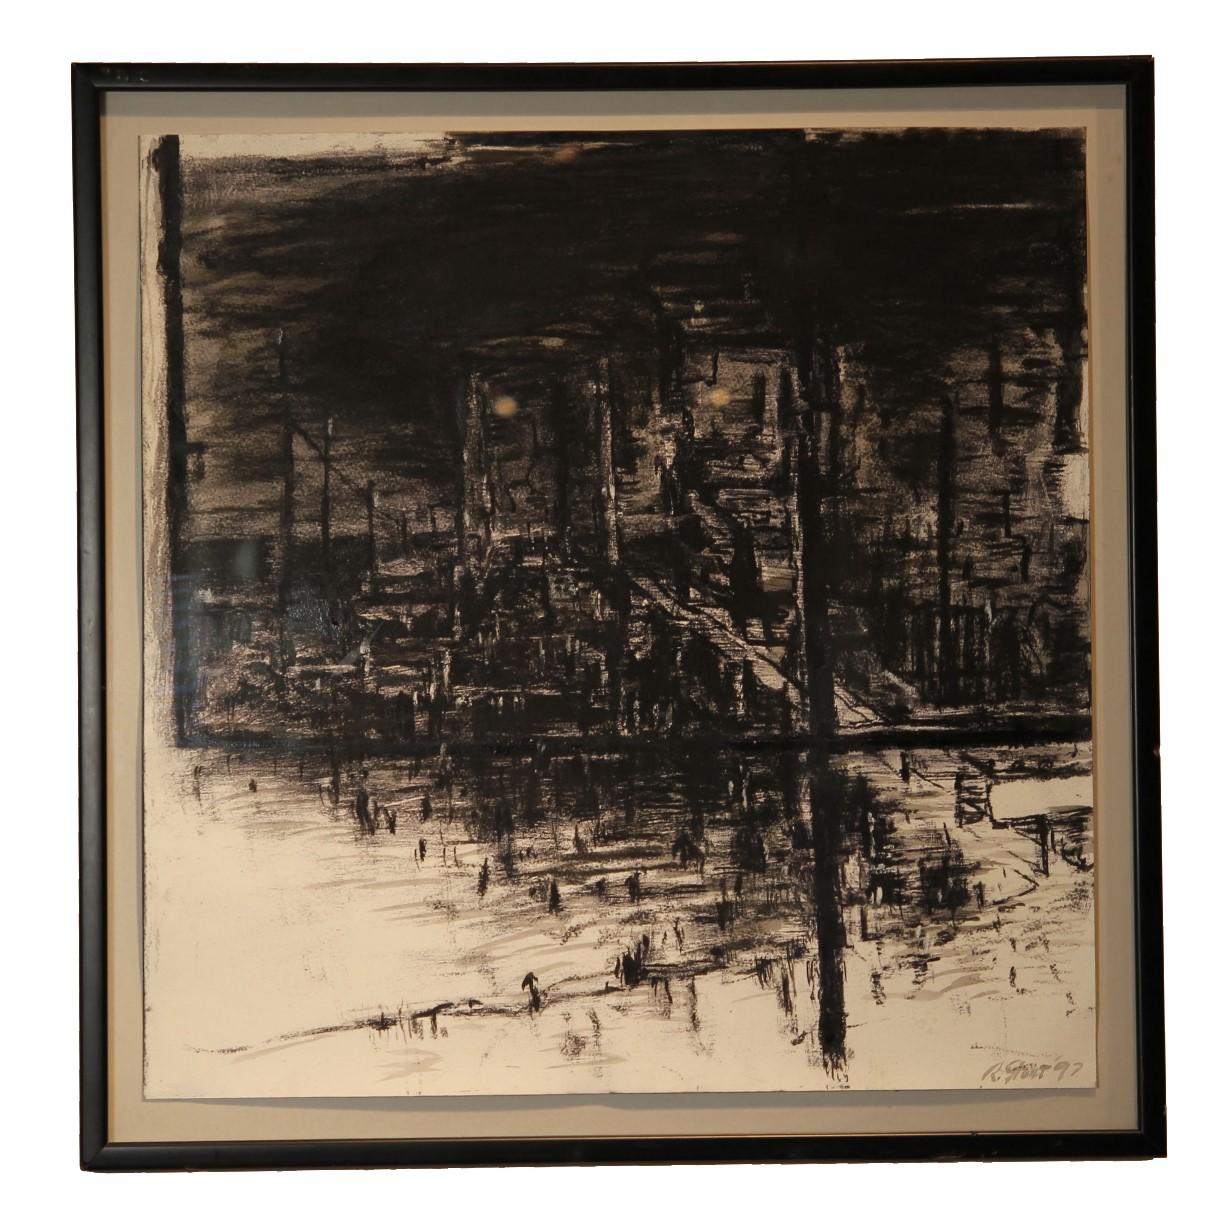 Black and White Abstract Cityscape - Mixed Media Art by Richard Stout